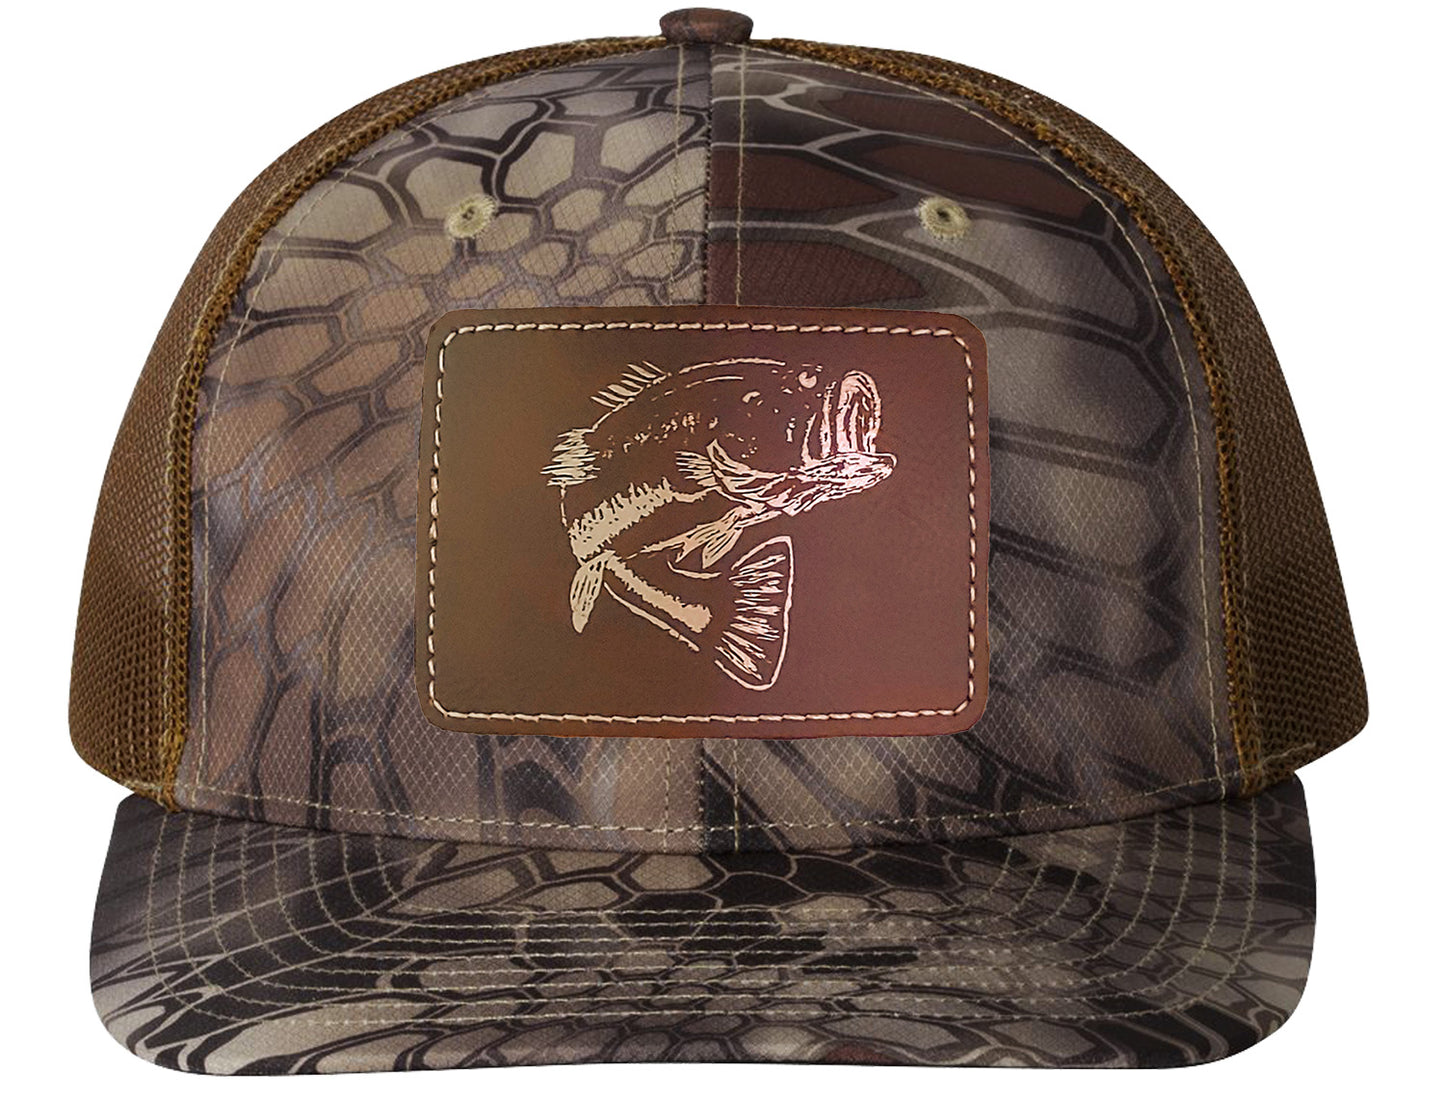 New! Bass Leather Patch Structured Trucker Hats